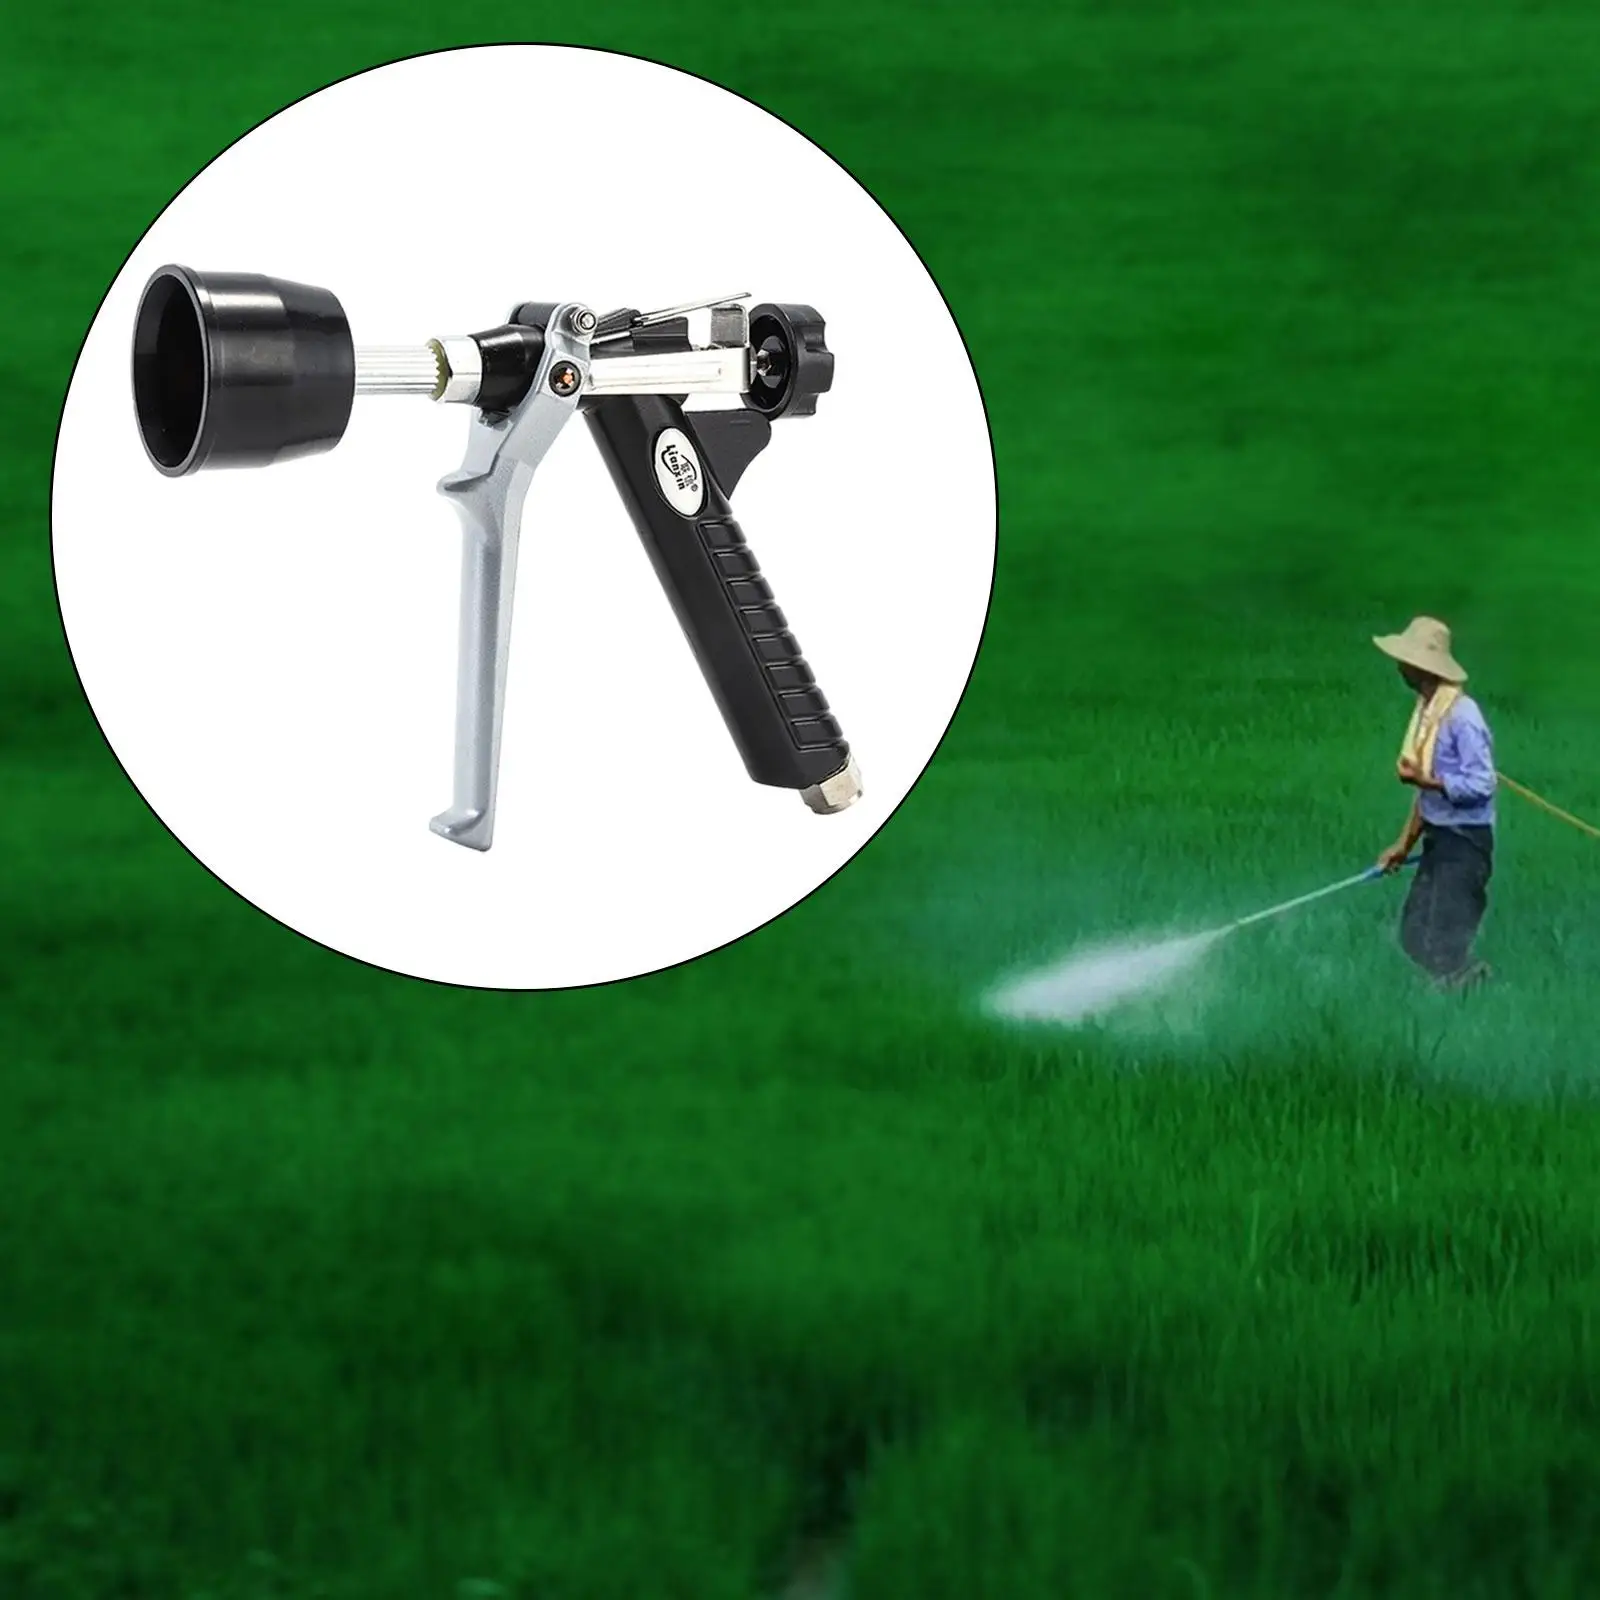 Agricultural Irrigation High Pressure Sprayer Nozzle Accessory for Lawn Yard